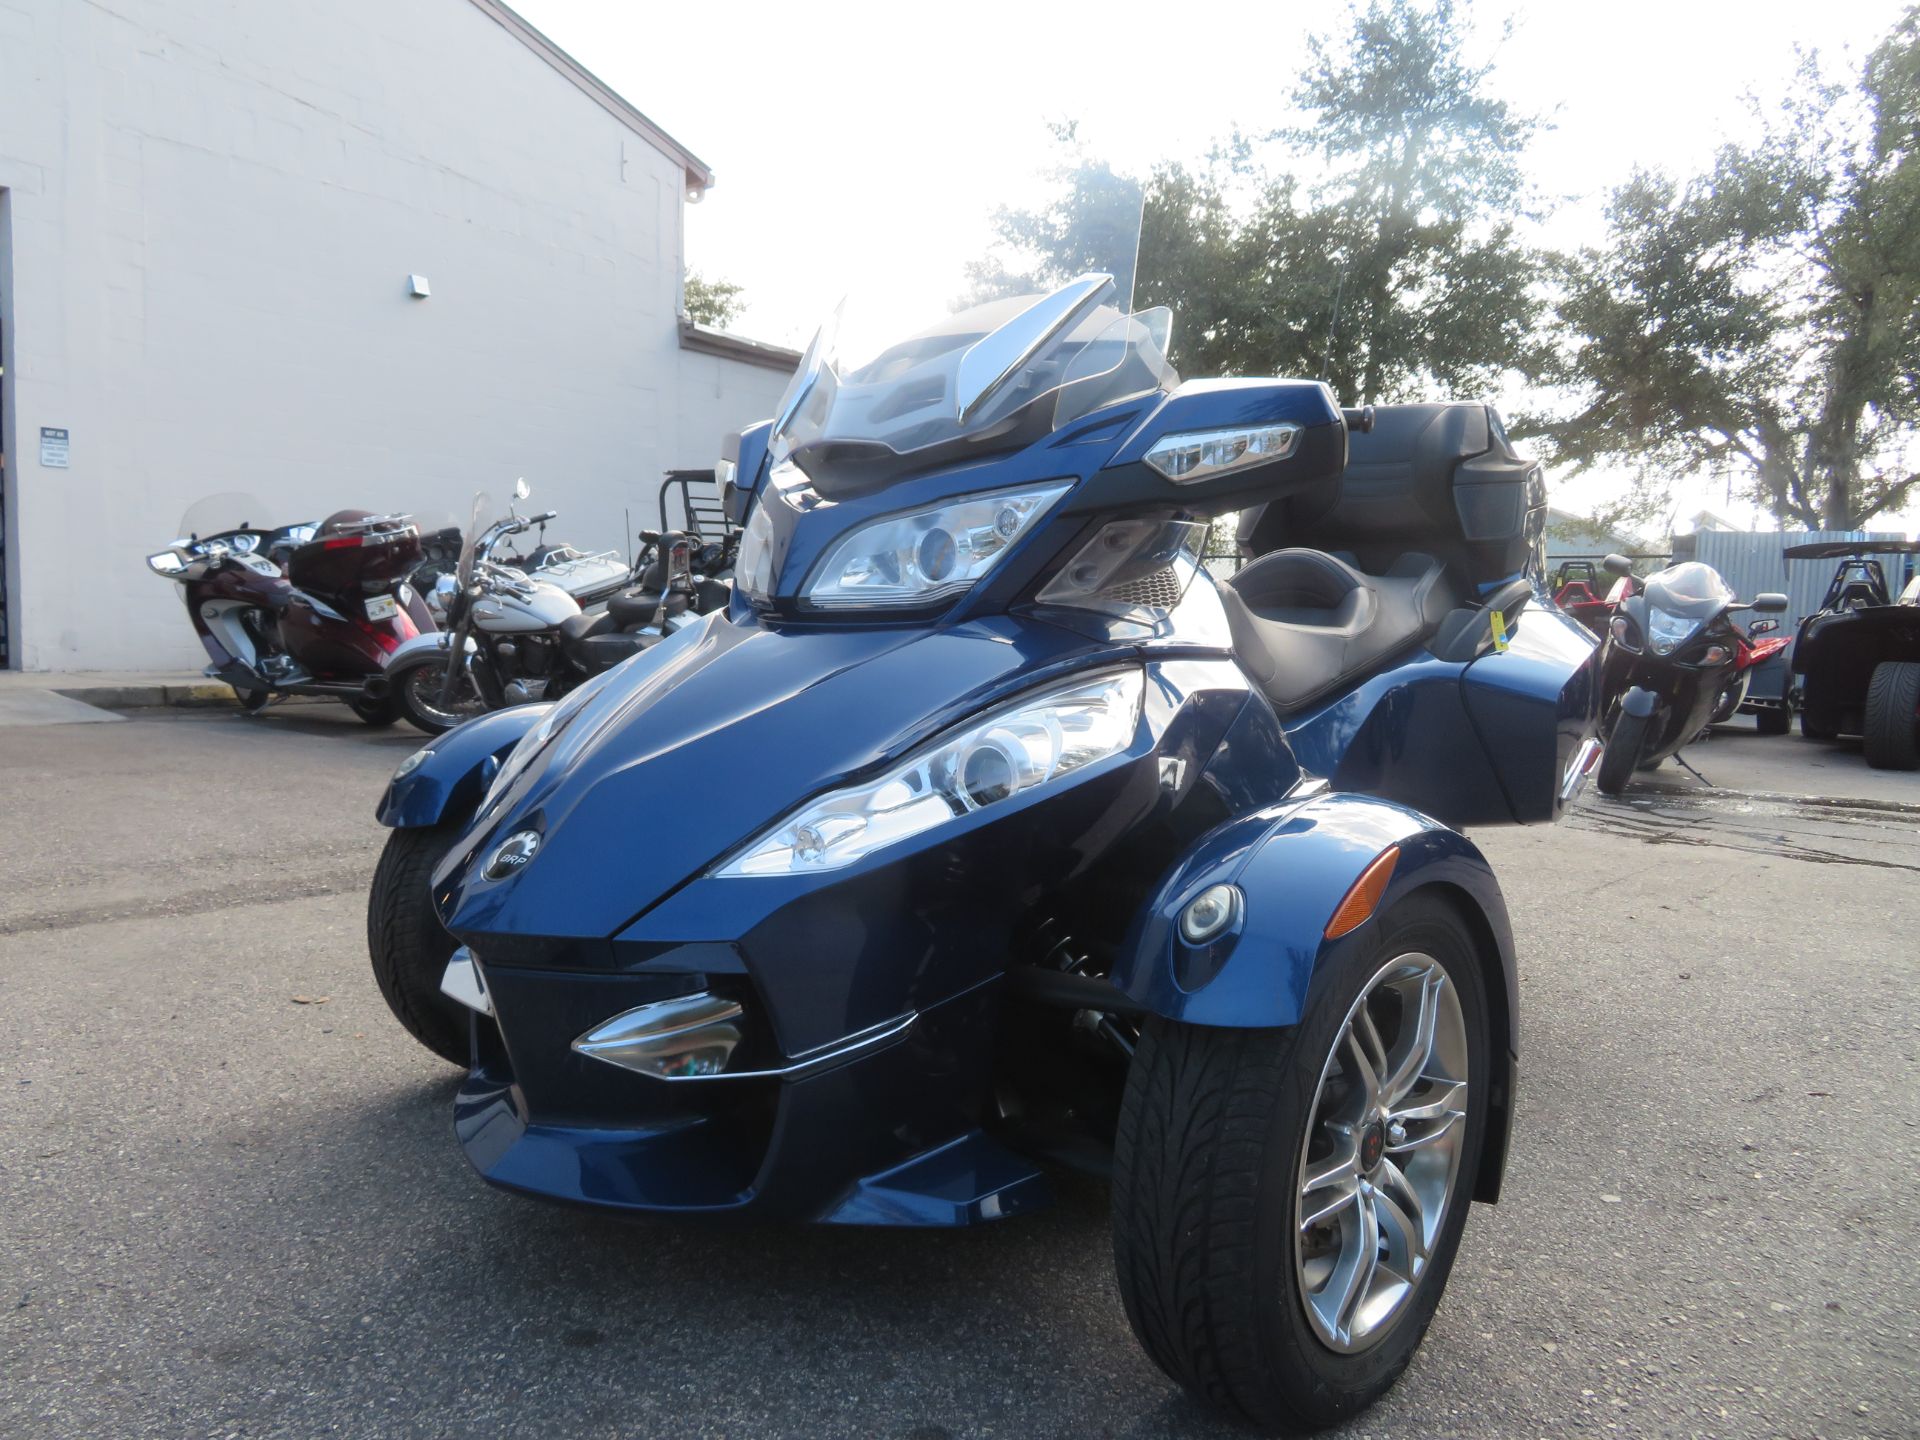 2011 Can-Am Spyder® RT-S SM5 in Sanford, Florida - Photo 5